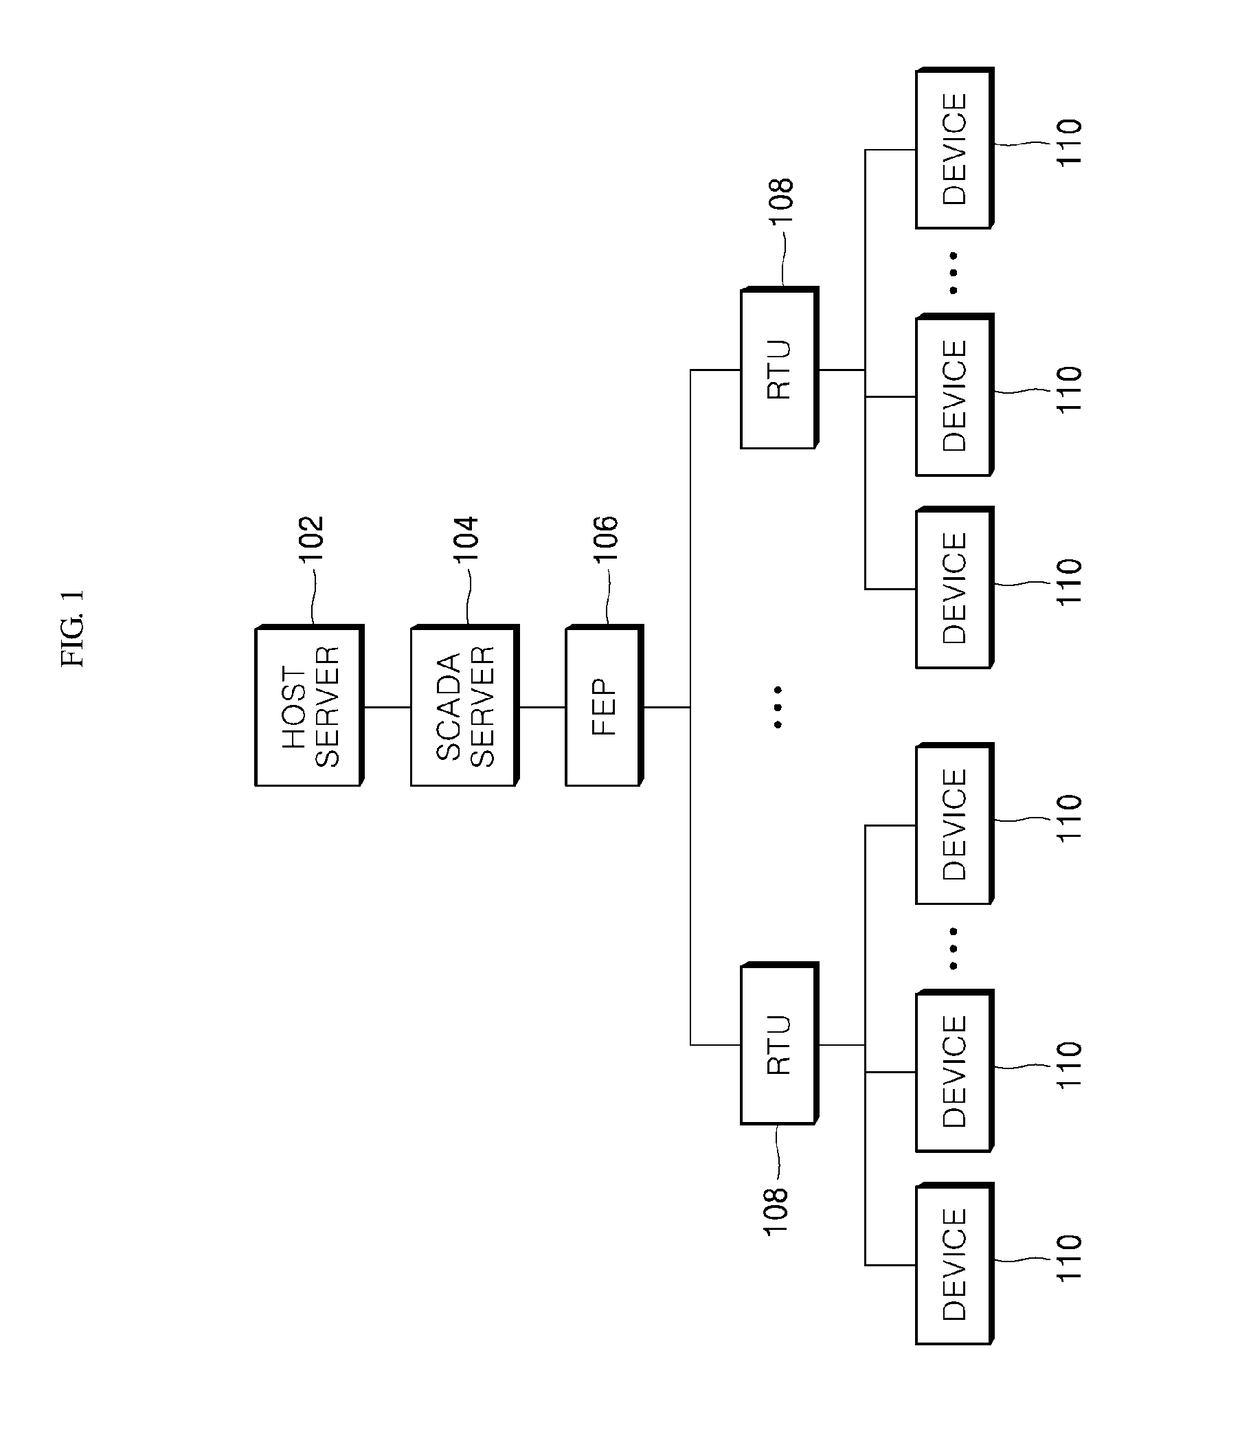 Apparatus for relaying data transmission in scada system